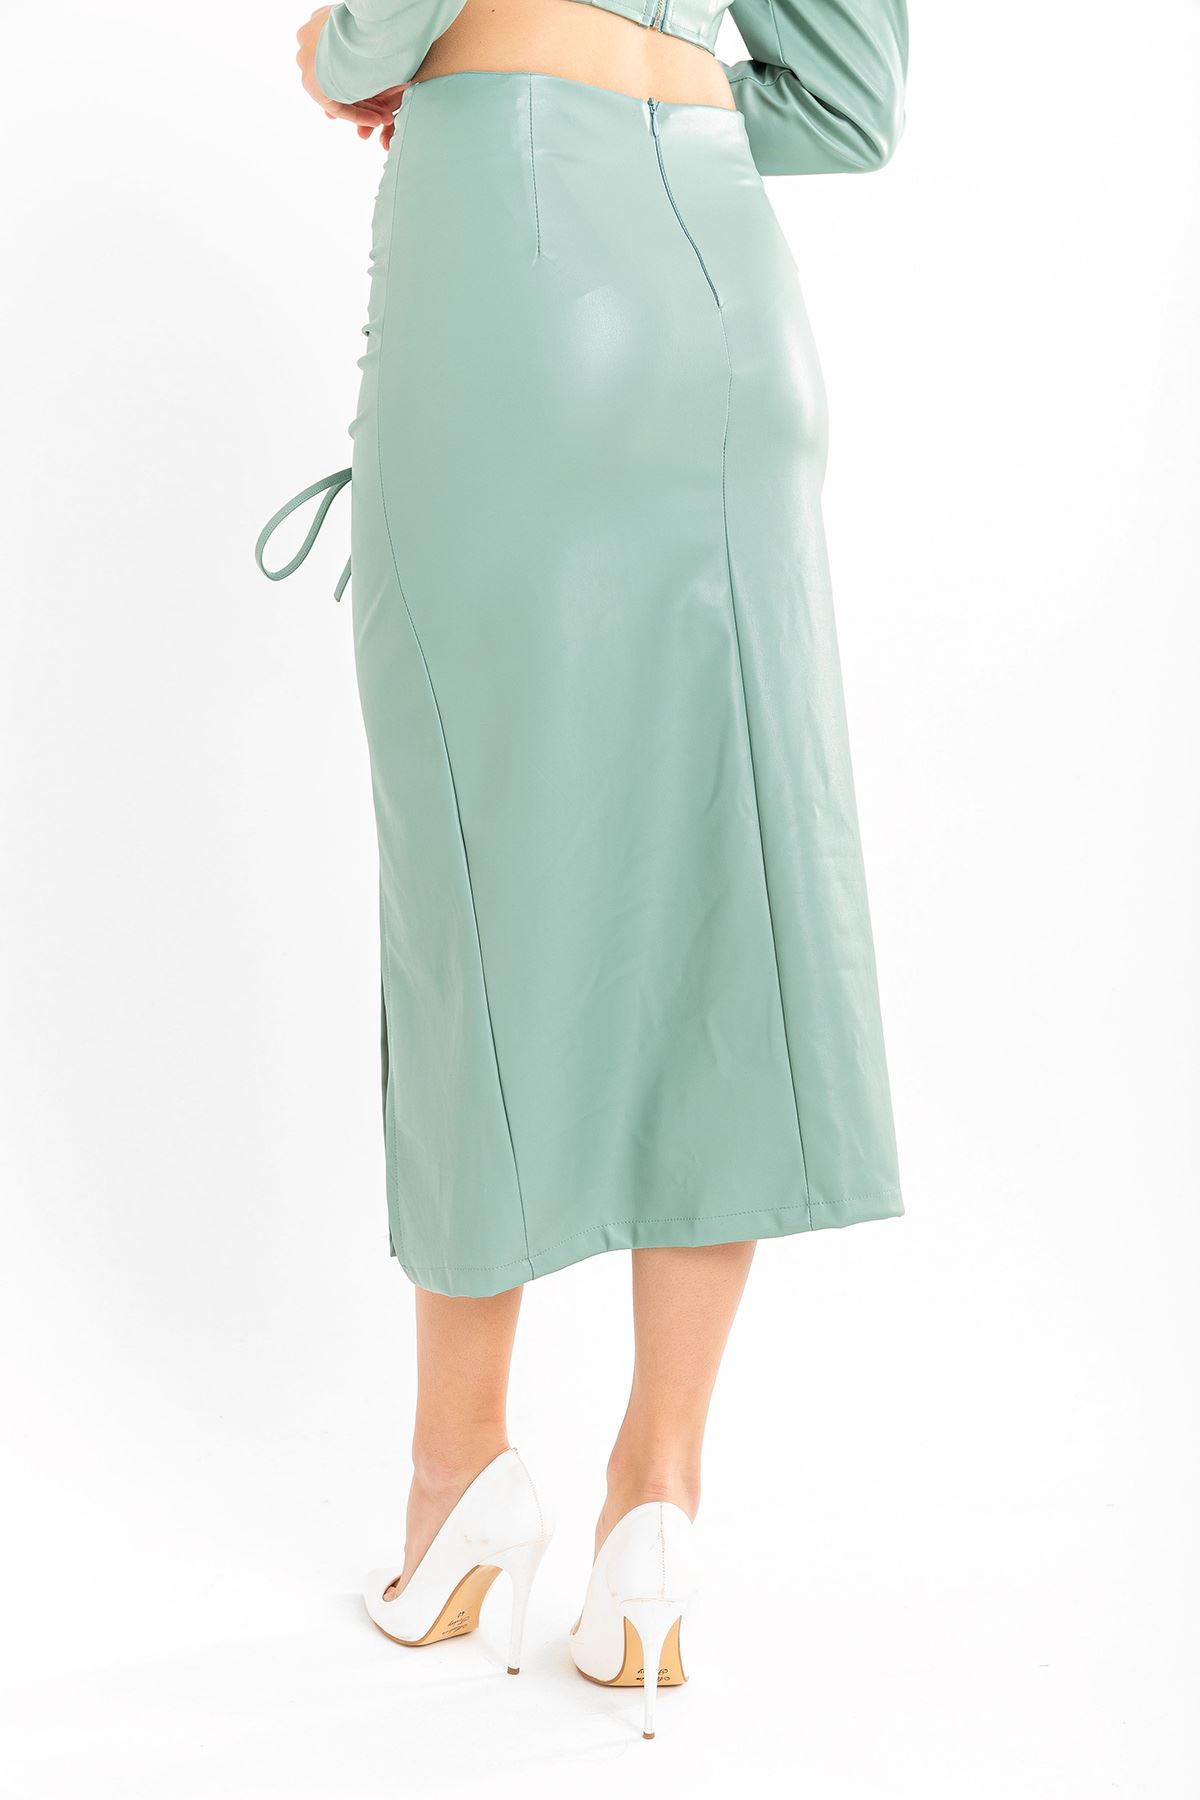 Leather Fabric Above Knee Shirred Slit Women'S Skirt - Mint